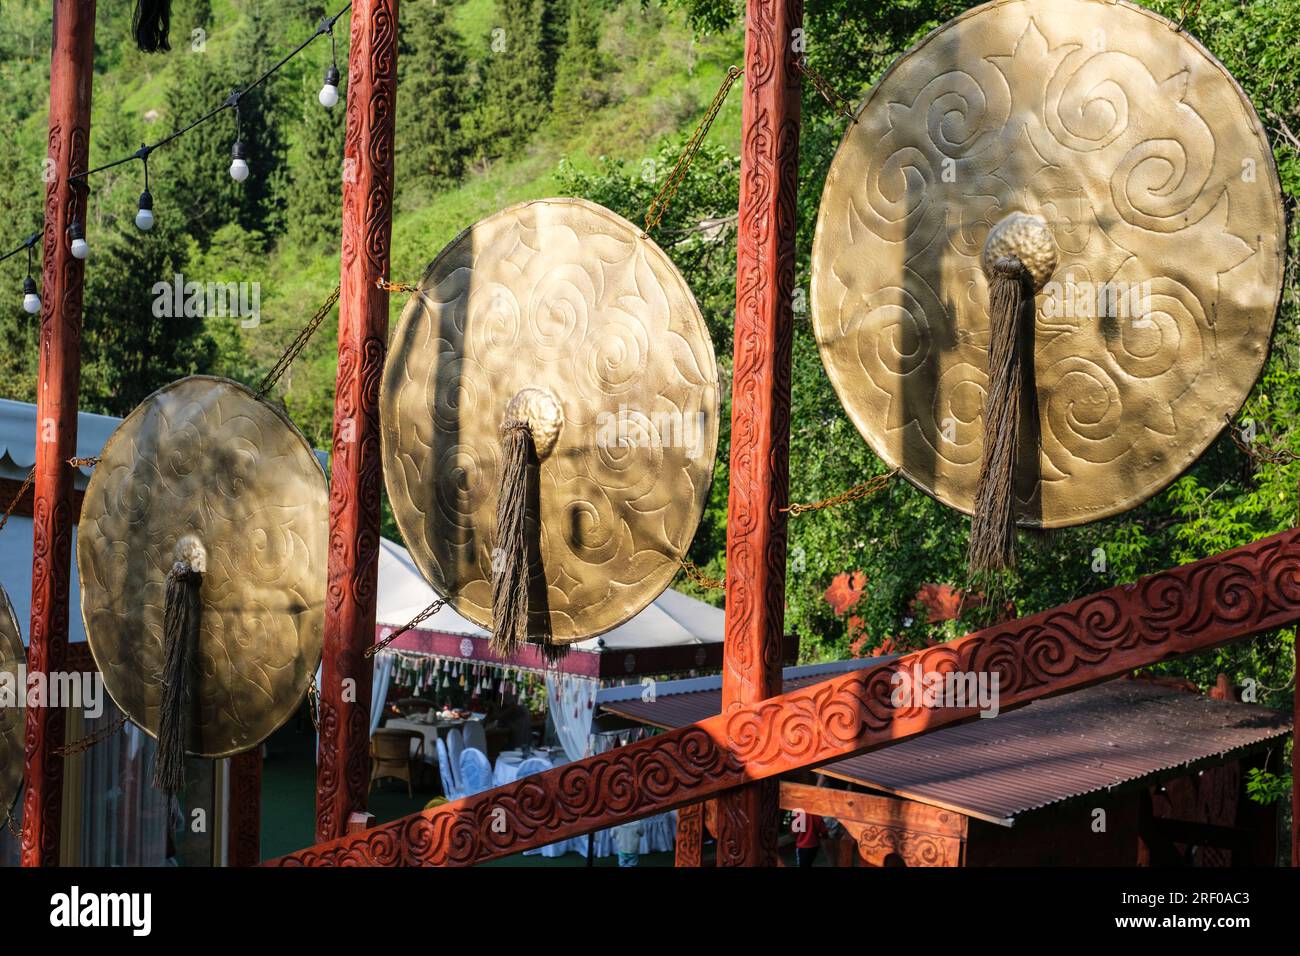 Kazakhstan, Ammasai Gorge. Shield Replicas Used as Decorations at Entrance to a Restaurant. Stock Photo